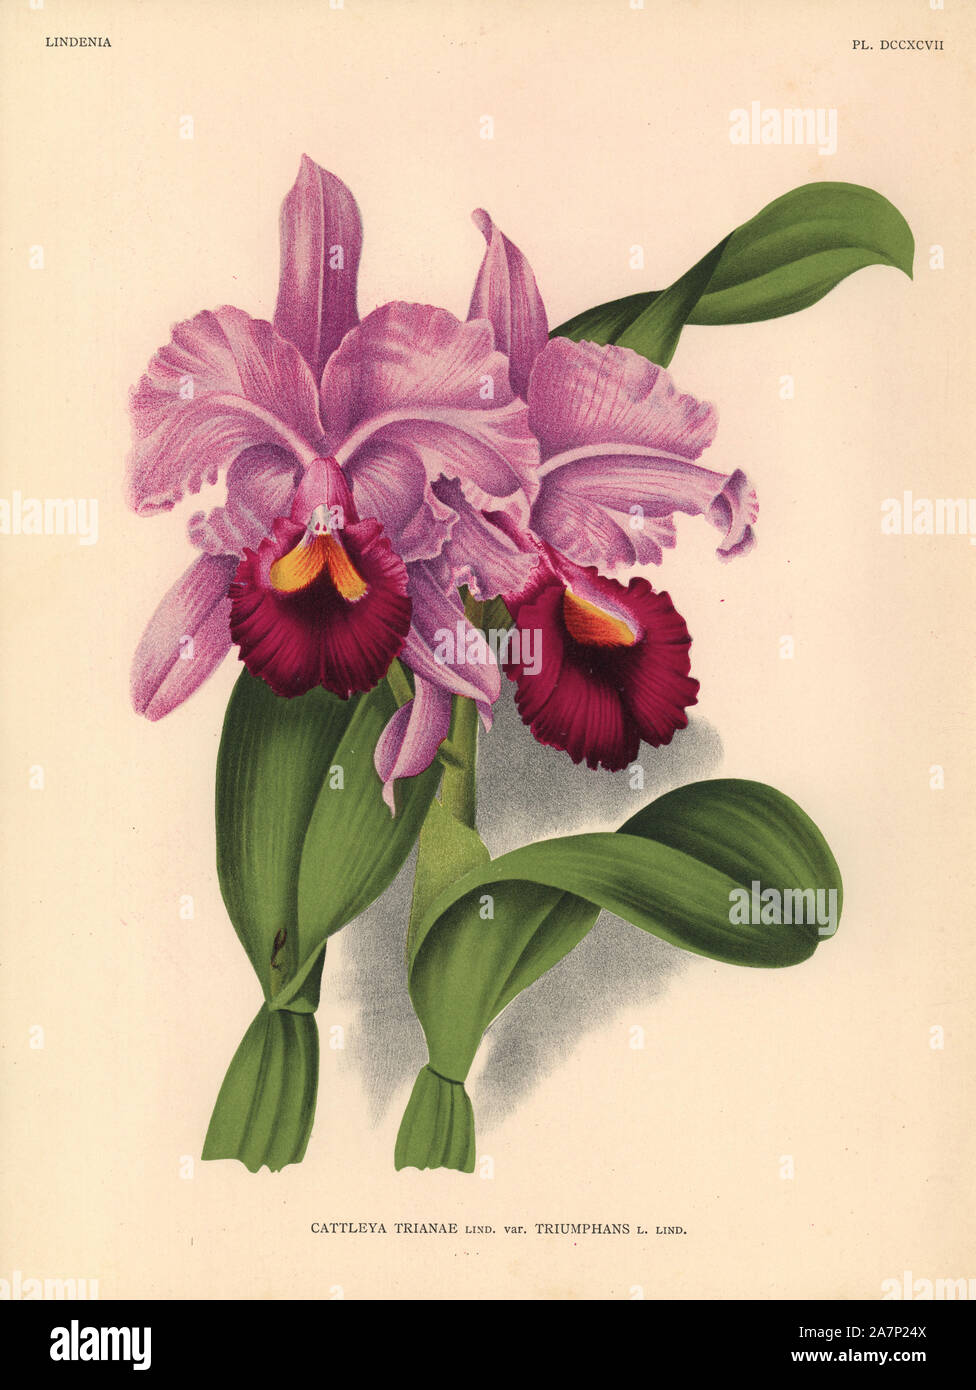 Triumphant variety of Cattleya trianae orchid. Botanical illustration in chromolithograph from Lucien Linden's 'Lindenia, Iconographie des Orchidees,' Brussels, 1903. Stock Photo